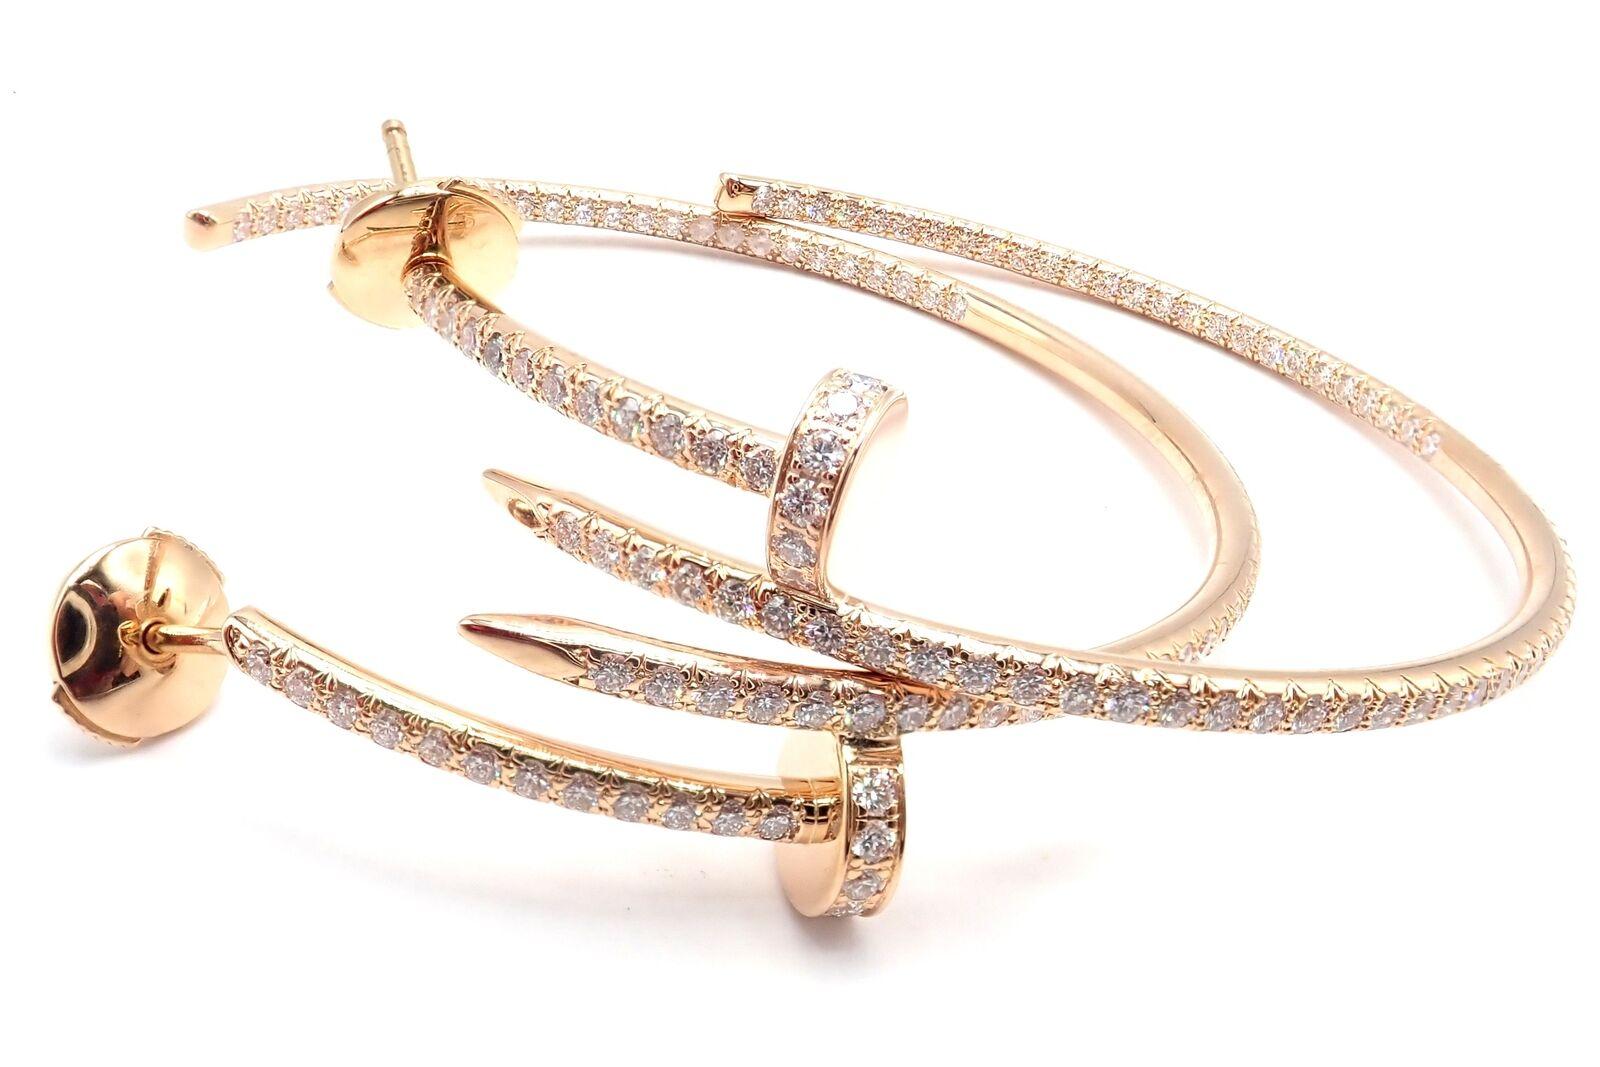 18k Rose Gold Diamond Juste un Clou Nail Hoop earrings by Cartier. 
With 176 round brilliant cut diamonds VVS1 clarity, E color total weight approximately 1.26ct. 
These earrings come with service paper from Cartier store in NYC and a Cartier